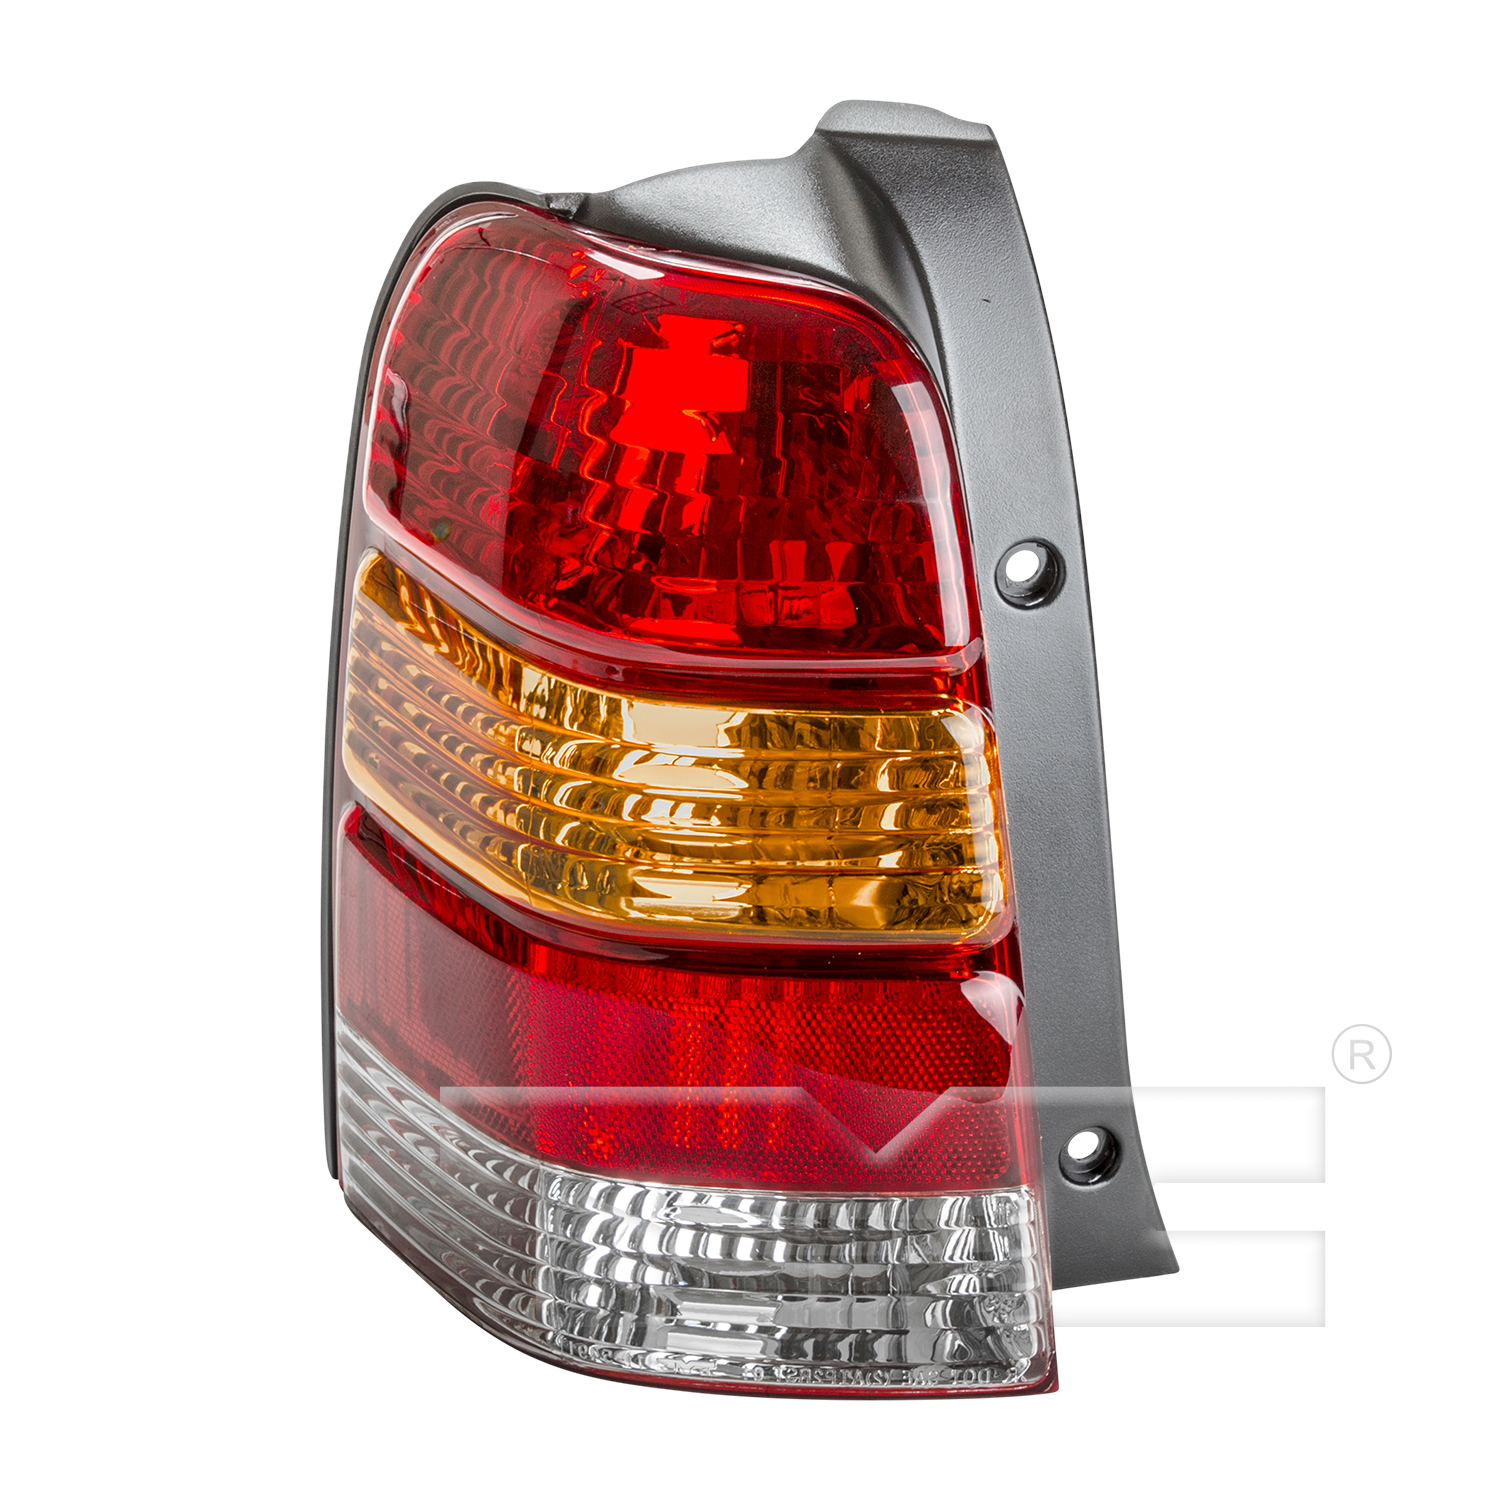 Aftermarket TAILLIGHTS for FORD - ESCAPE, ESCAPE,01-07,LT Taillamp lens/housing